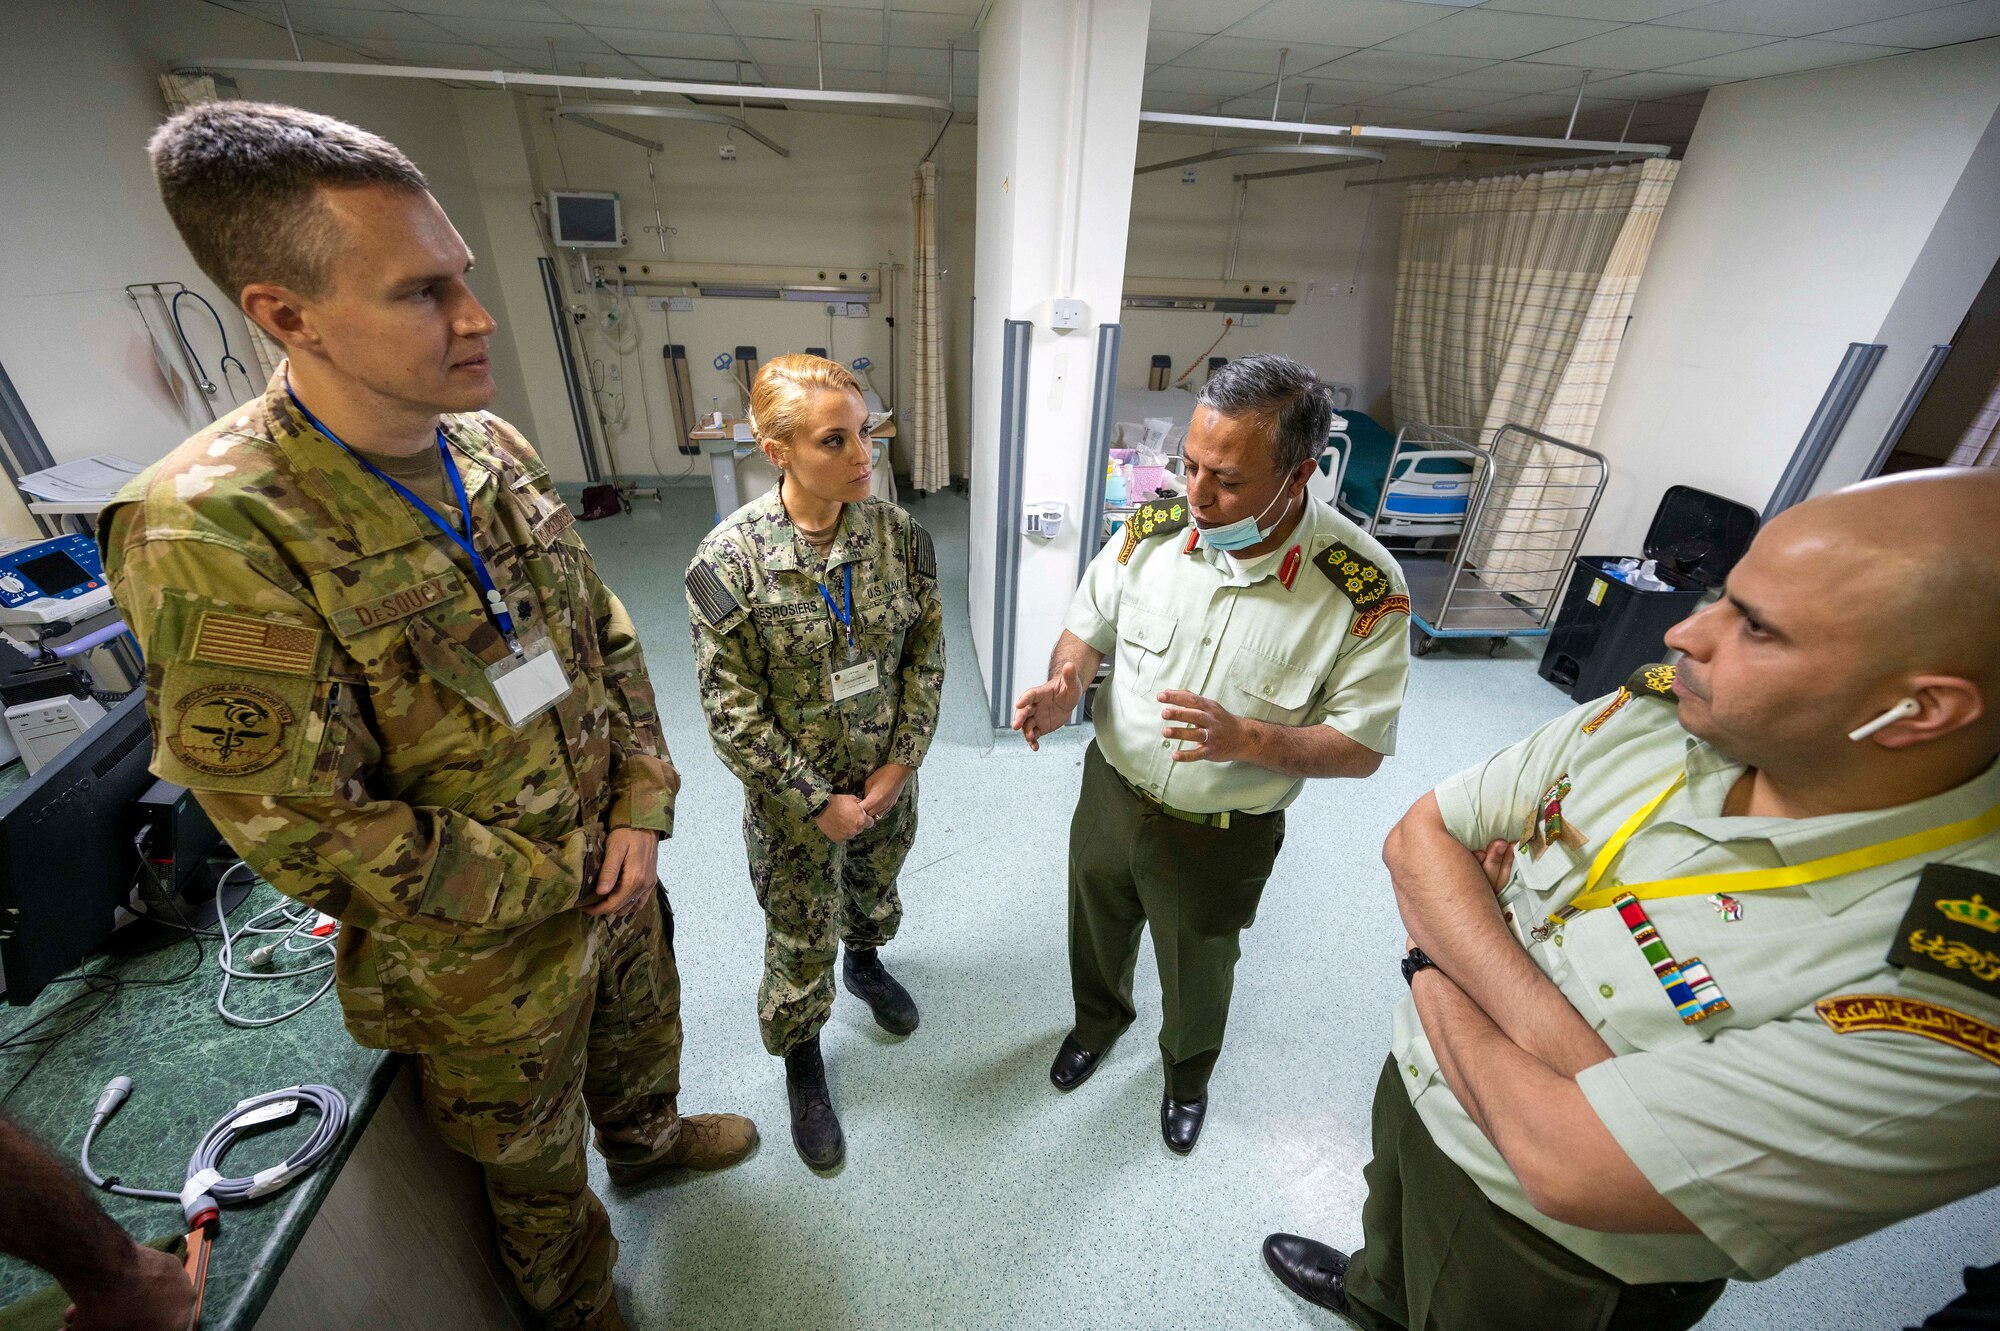 Lt. Col. Erik DeSoucy, Brooke Army Medical Center trauma surgeon and critical care physician, and Lt. Cmdr. Taylor DesRosiers, Walter Reed Medical Center critical care fellow, listen to Dr. Abdullah Alsarhan, Jordanian Royal Medical Service Chief of intensive care unit, discuss post-surgery procedures inside the King Hussein Medical Center May 8, 2022 in Amman, Jordan.